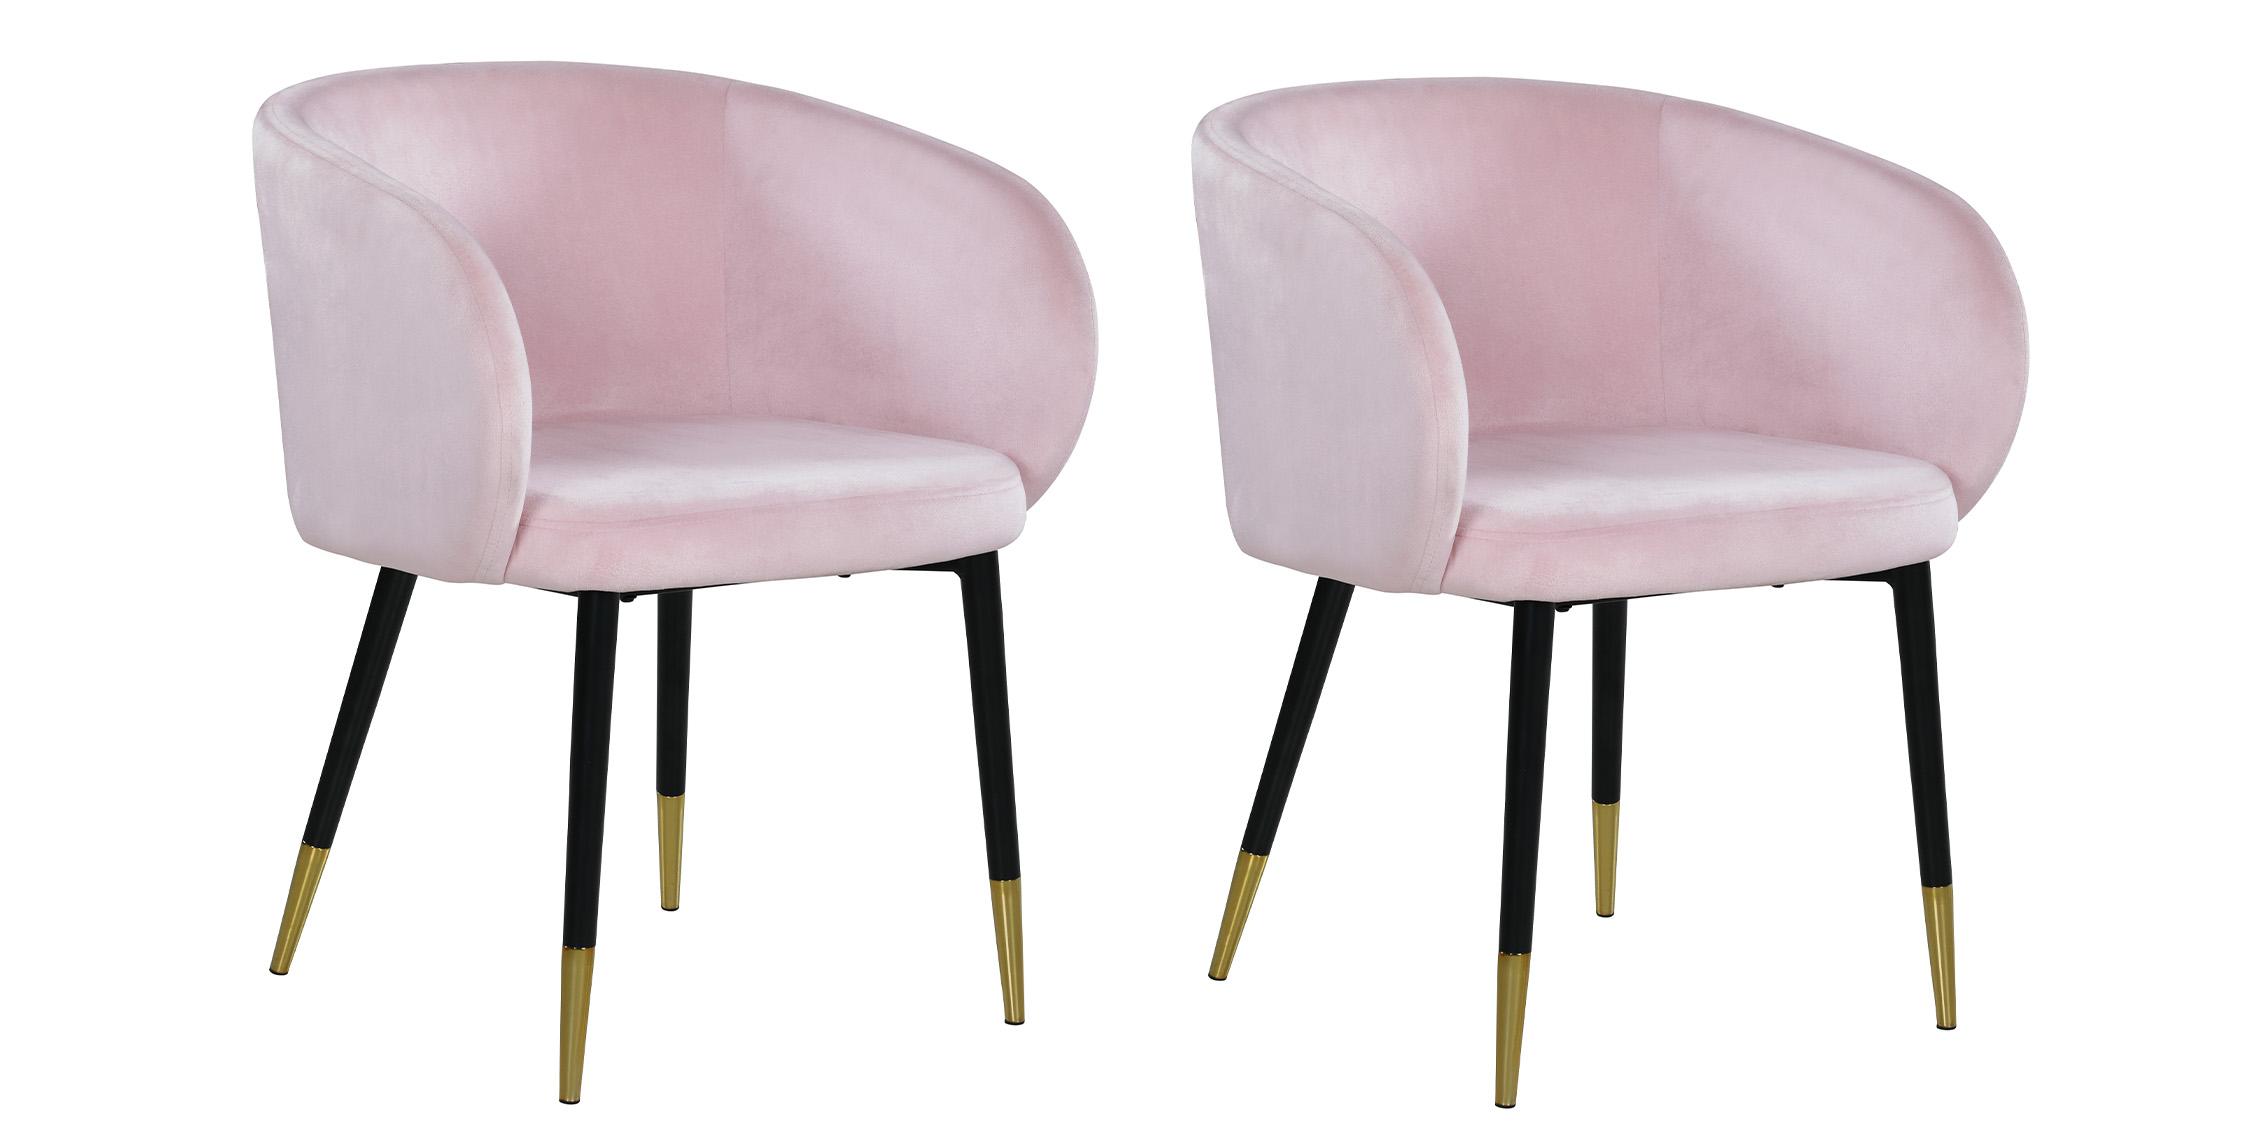 Contemporary, Modern Dining Chair Set LOUISE 733Pink 733Pink-C-Set-2 in Chrome, Pink Velvet